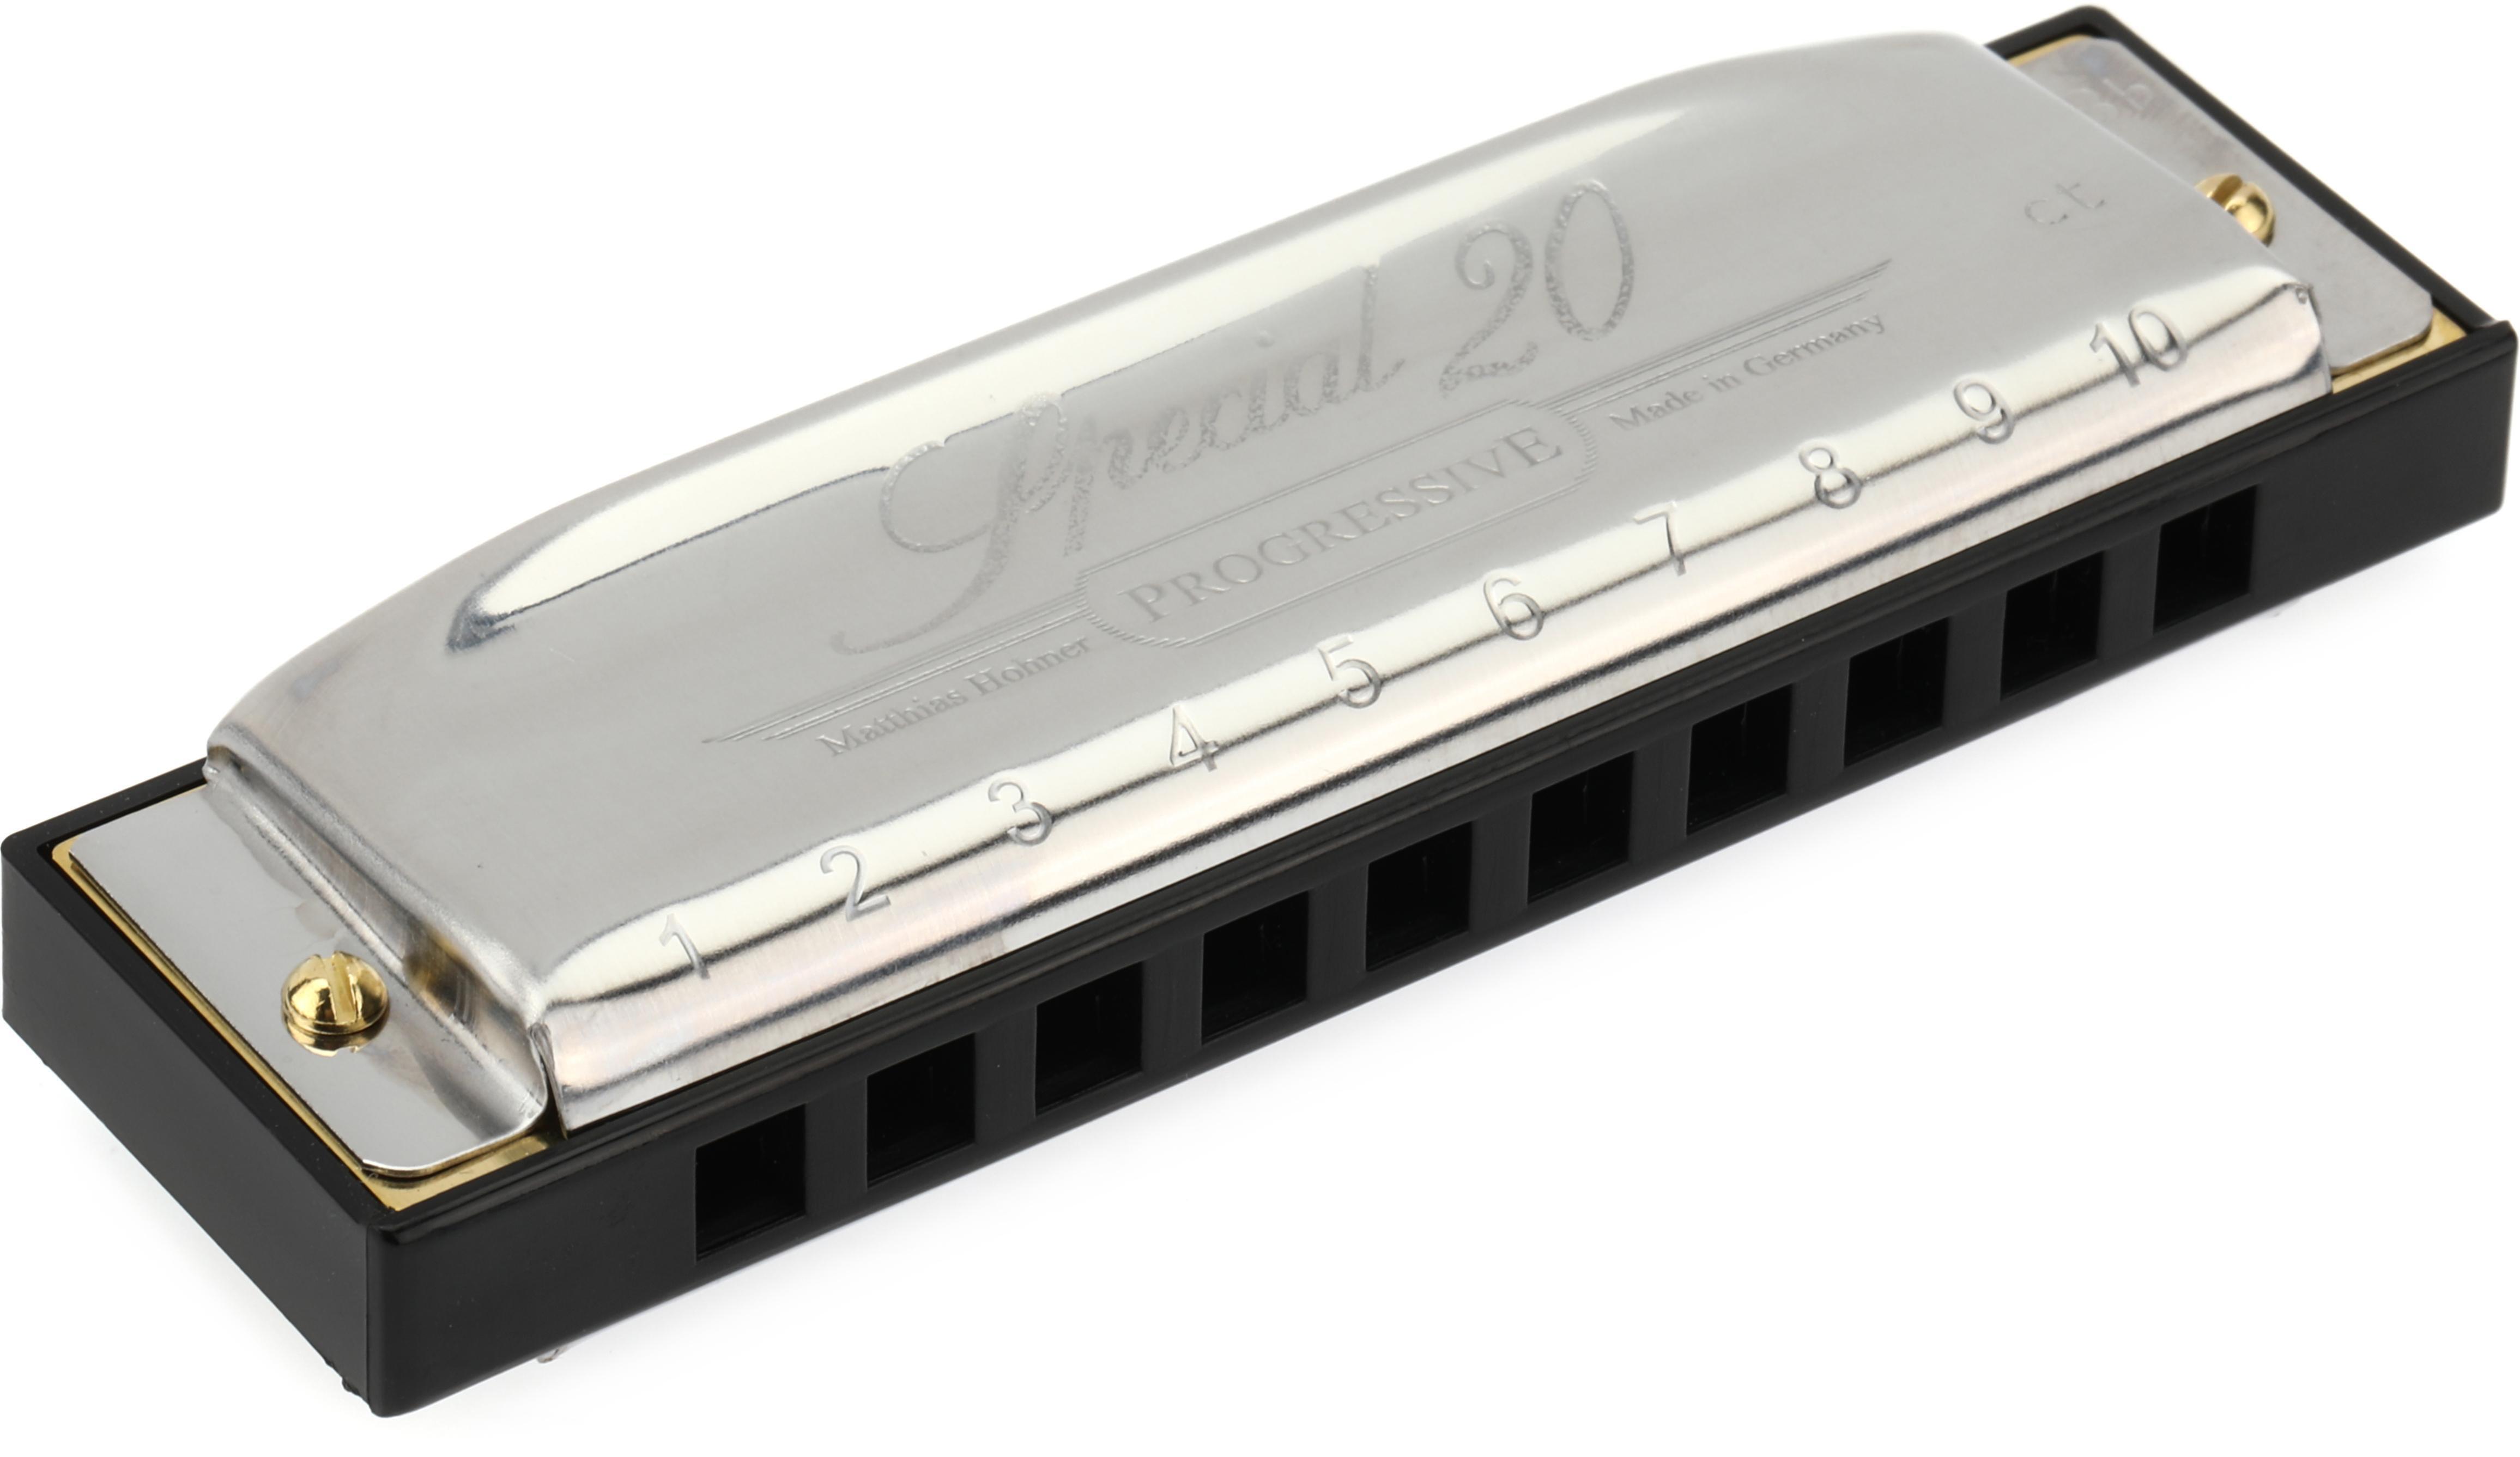 Hohner Special 20 Harmonica - Key of A